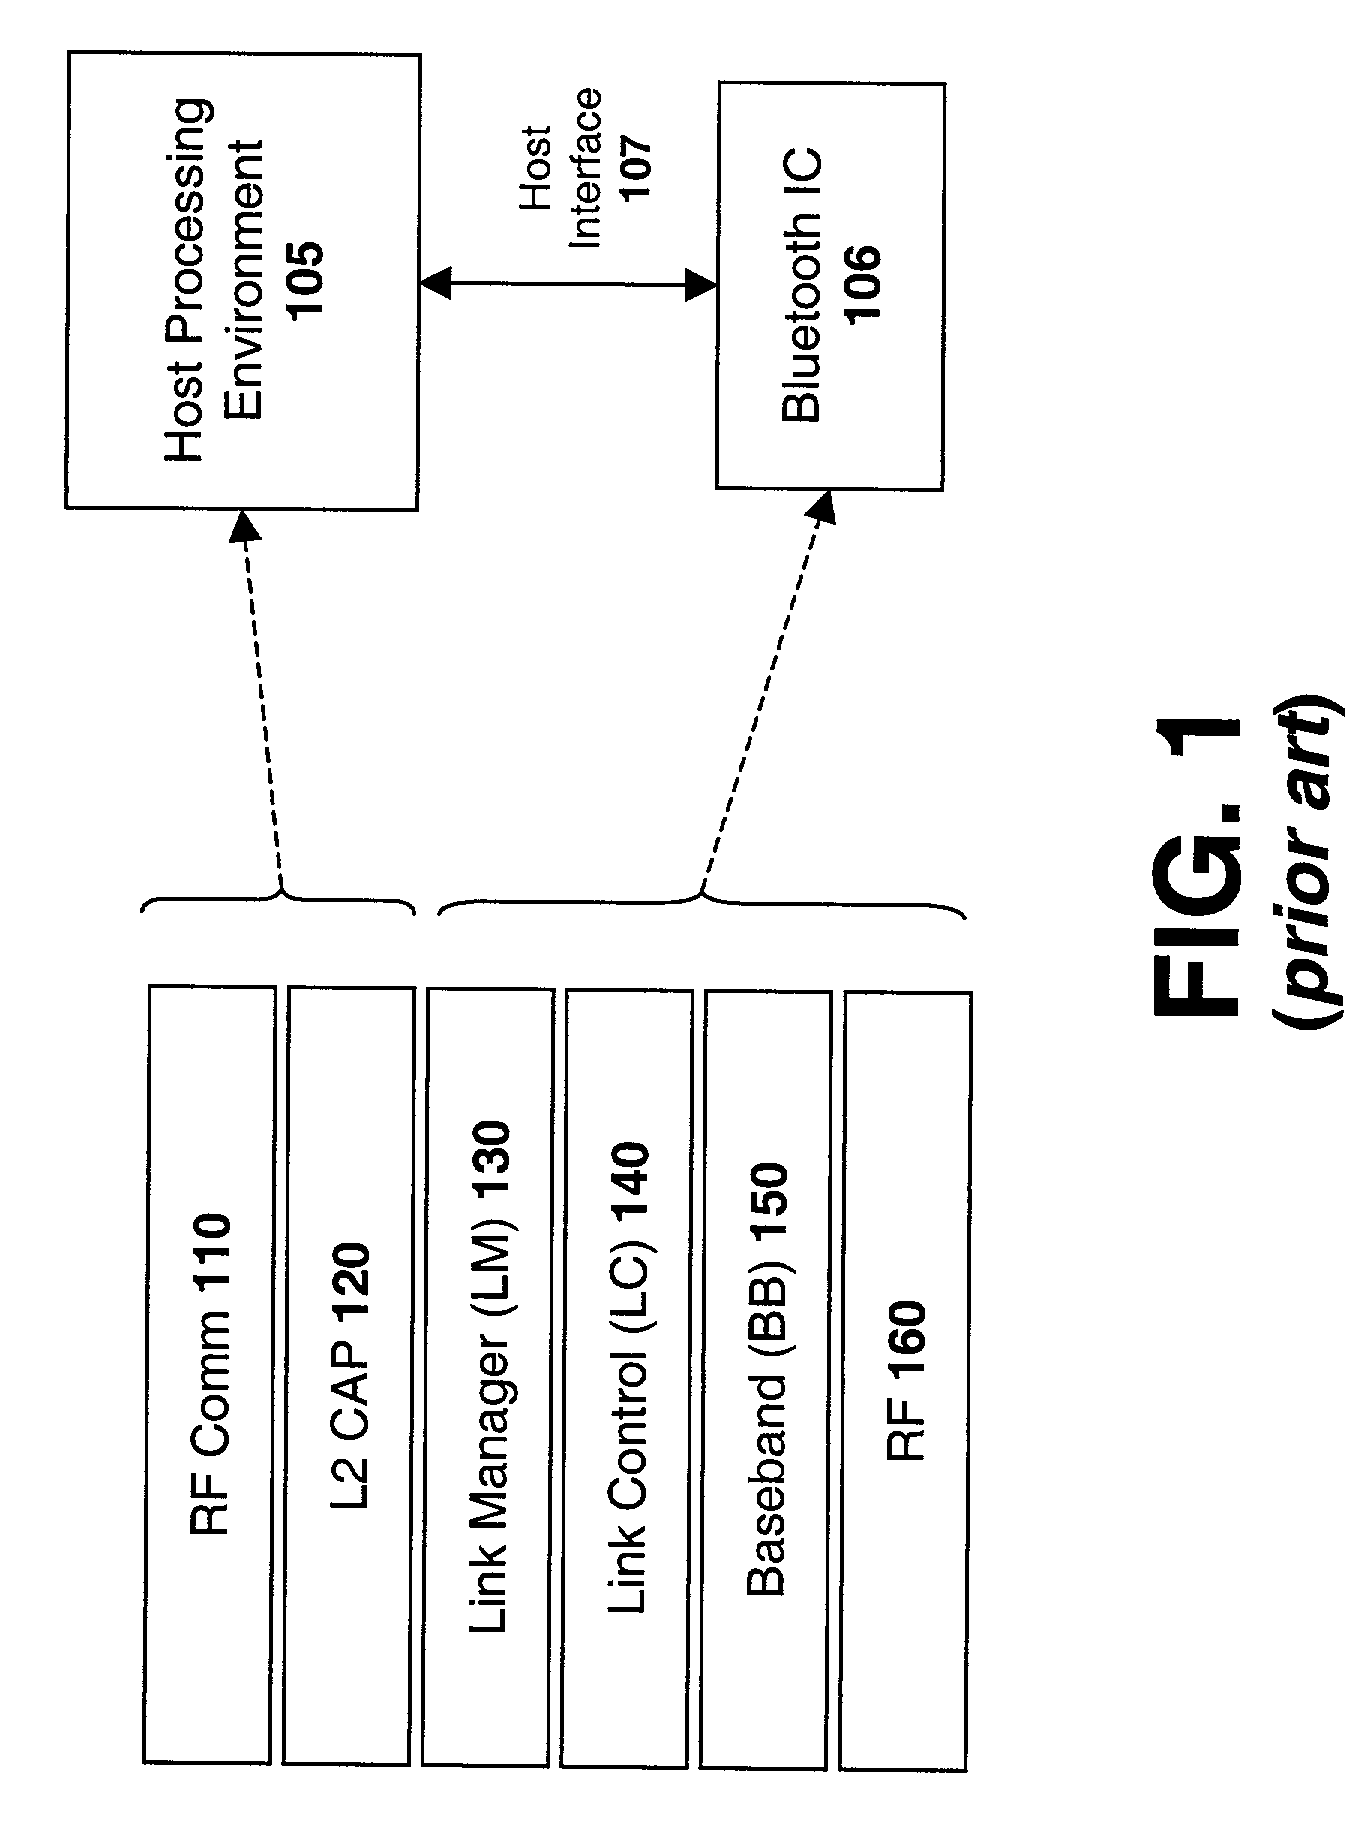 Transmit-only and receive-only Bluetooth apparatus and method